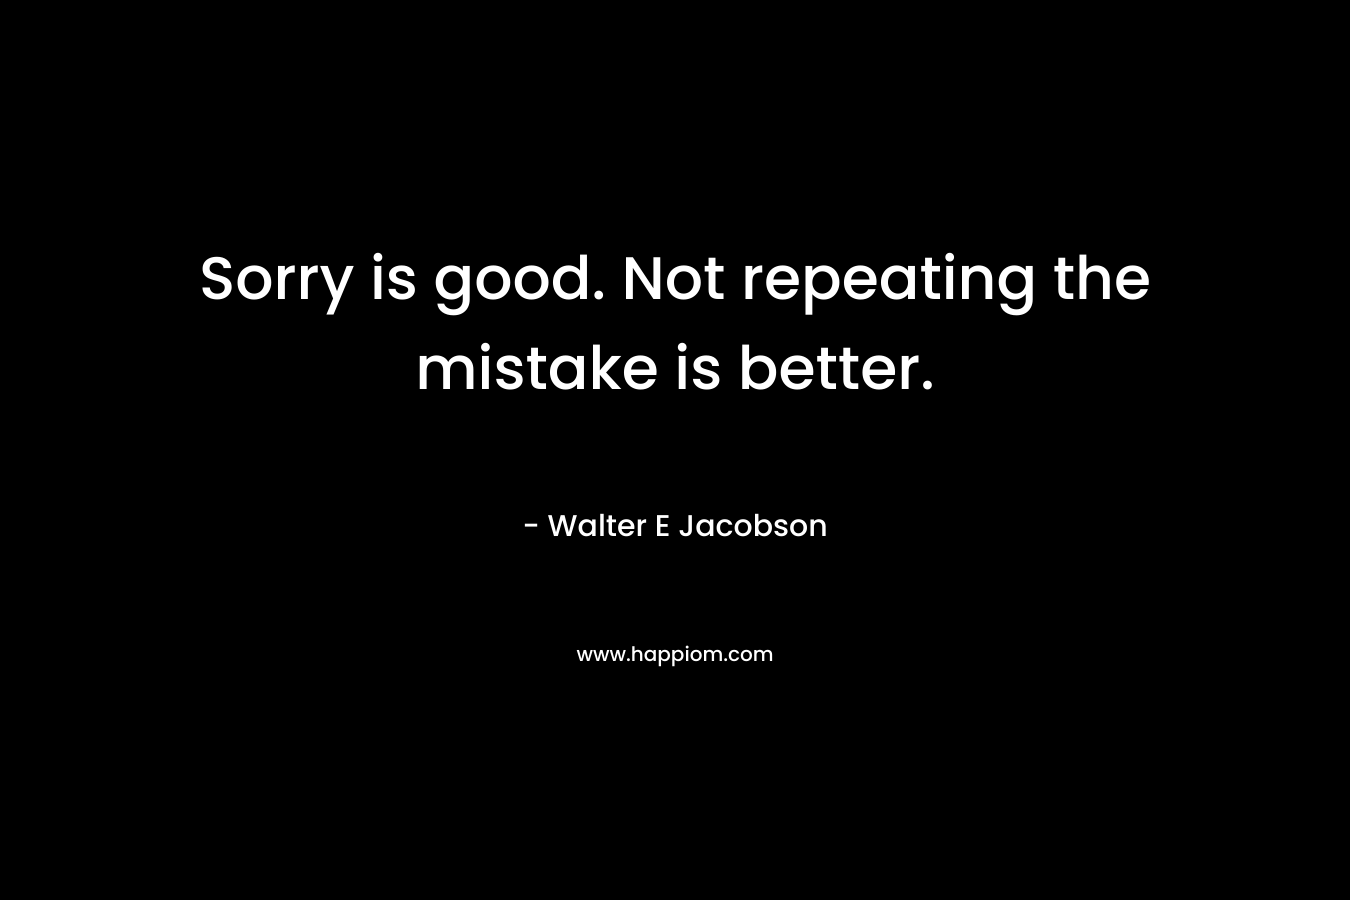 Sorry is good. Not repeating the mistake is better. – Walter E Jacobson